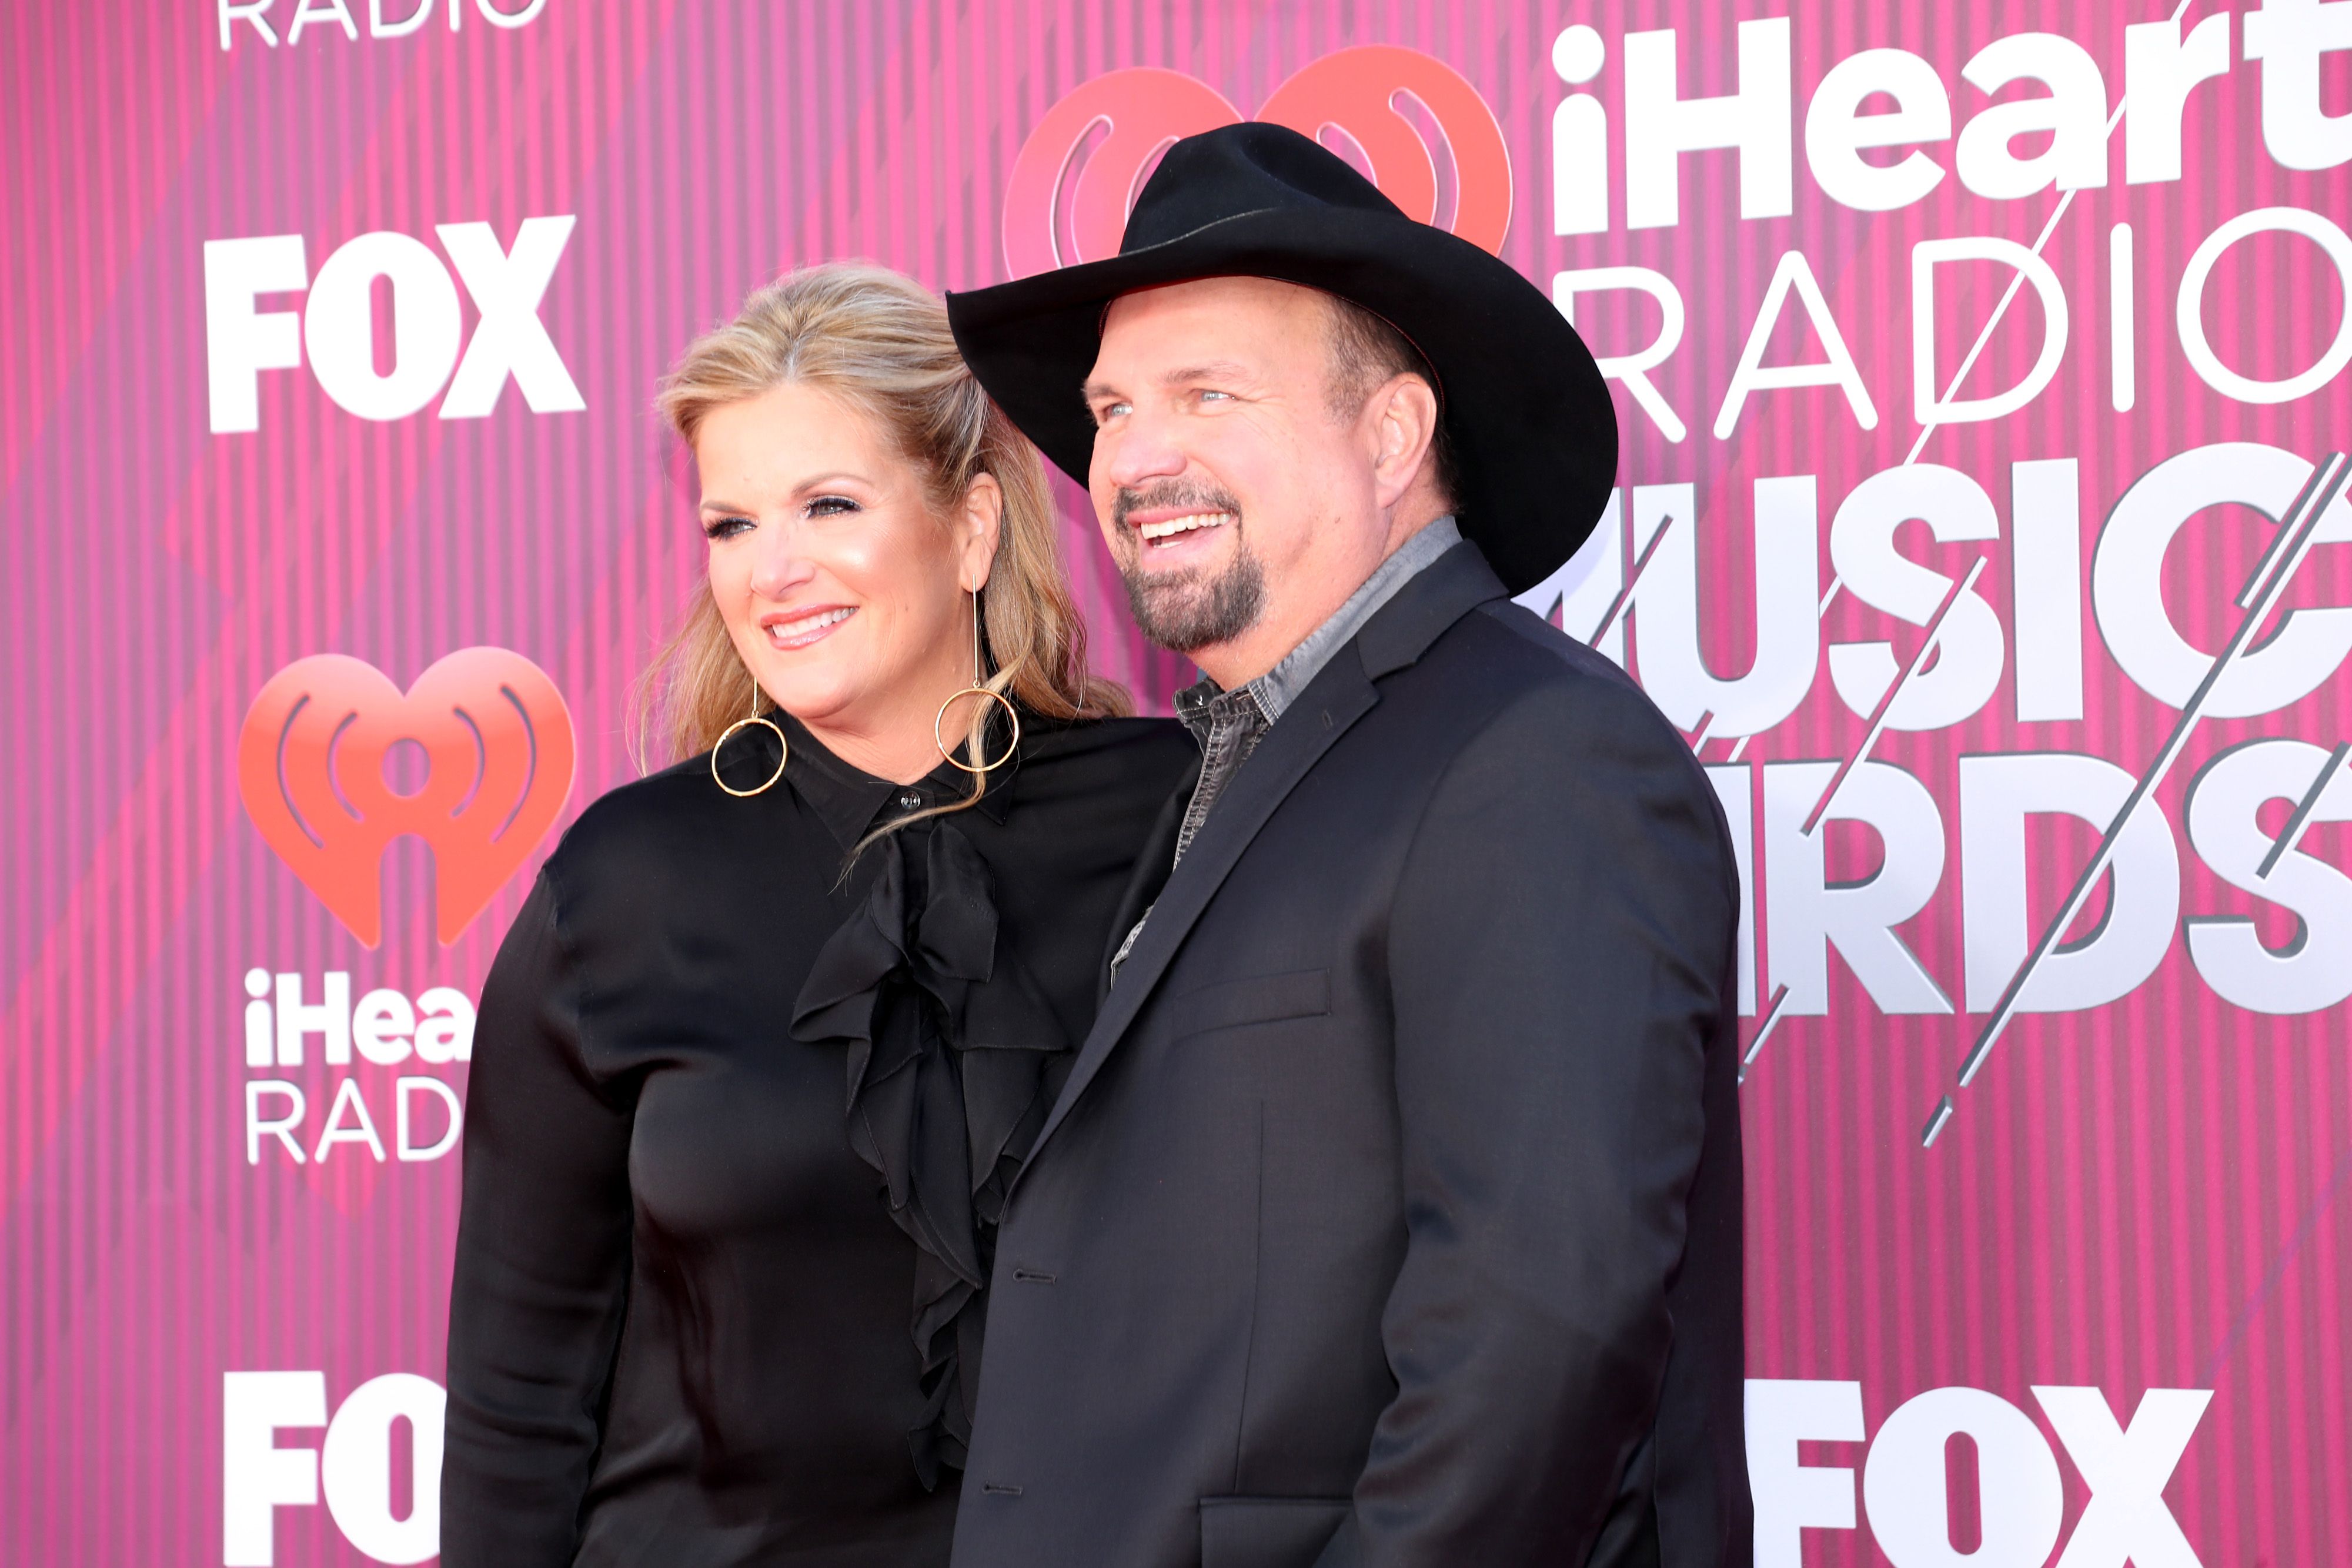 Trisha Yearwood and Garth Brooks at the 2019 iHeartRadio Music Awards on March 14, 2019 | Photo: Getty Images